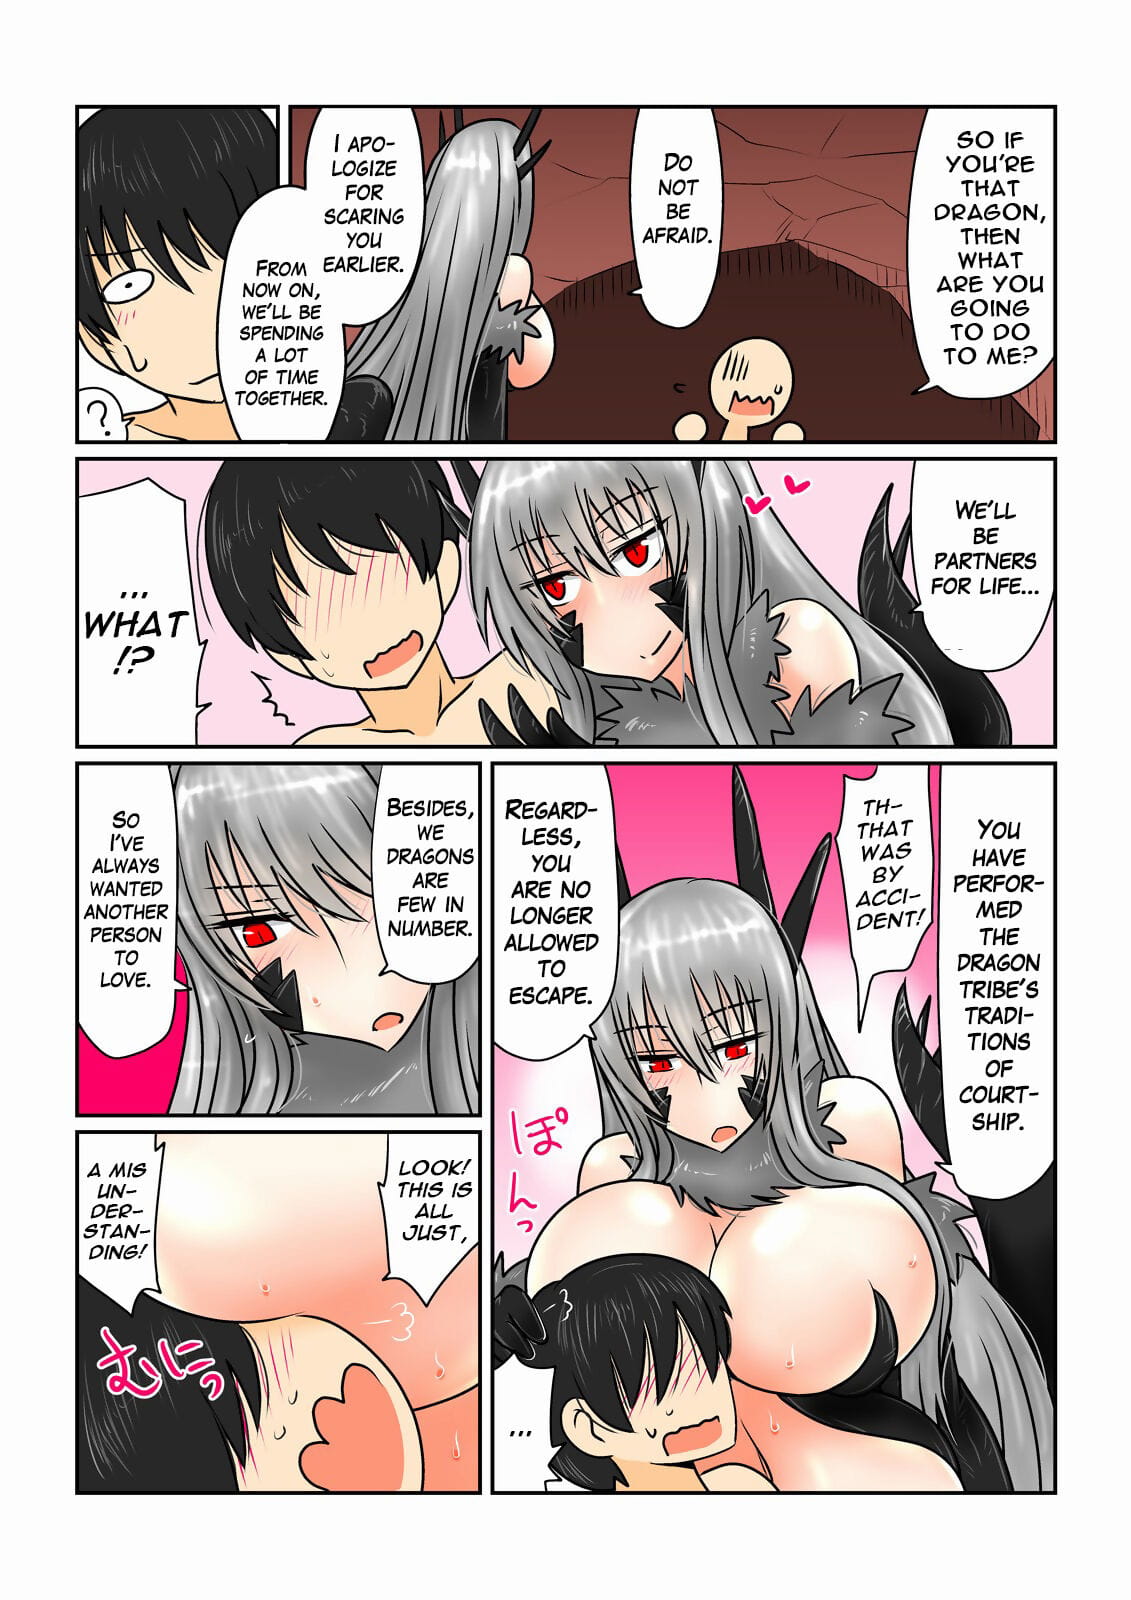 Game Over -Black Dragon Hen- - Game Over -Black Dragon Edition- page 1